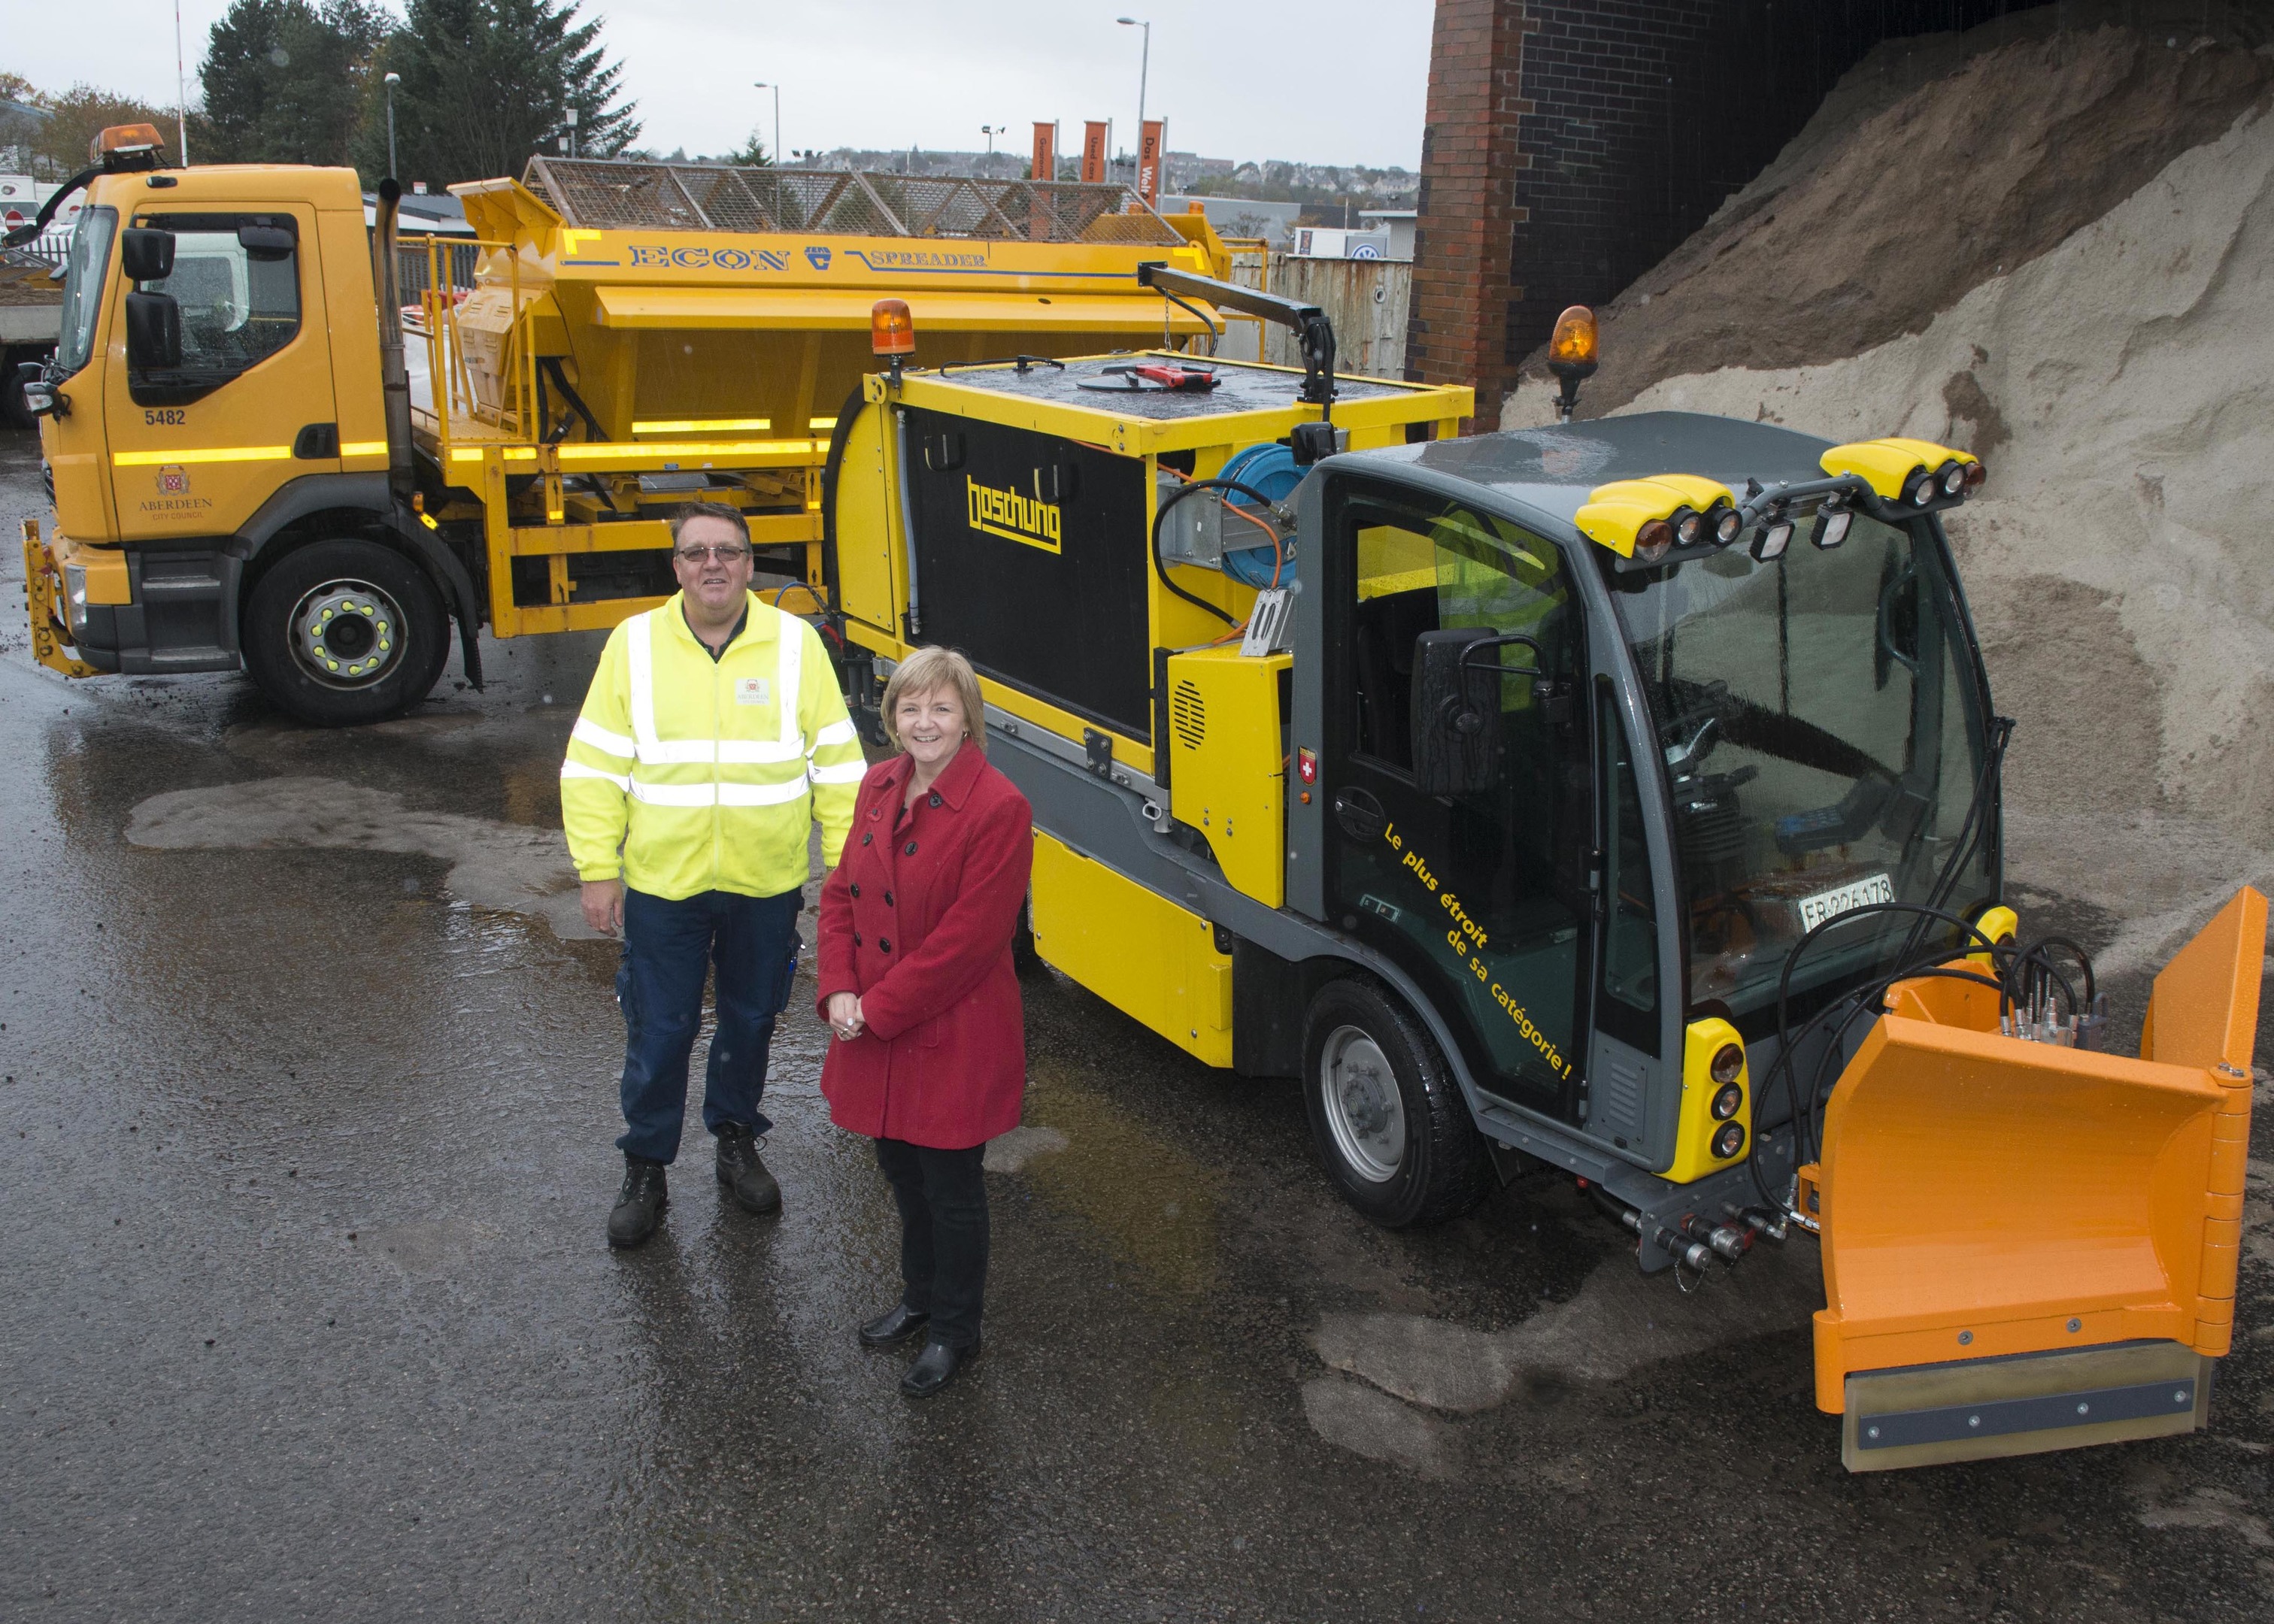 04/11/16 Councillor Jenny Laing and gritter driver Gordon Walters with gritting equipment at Tullos Road Depot